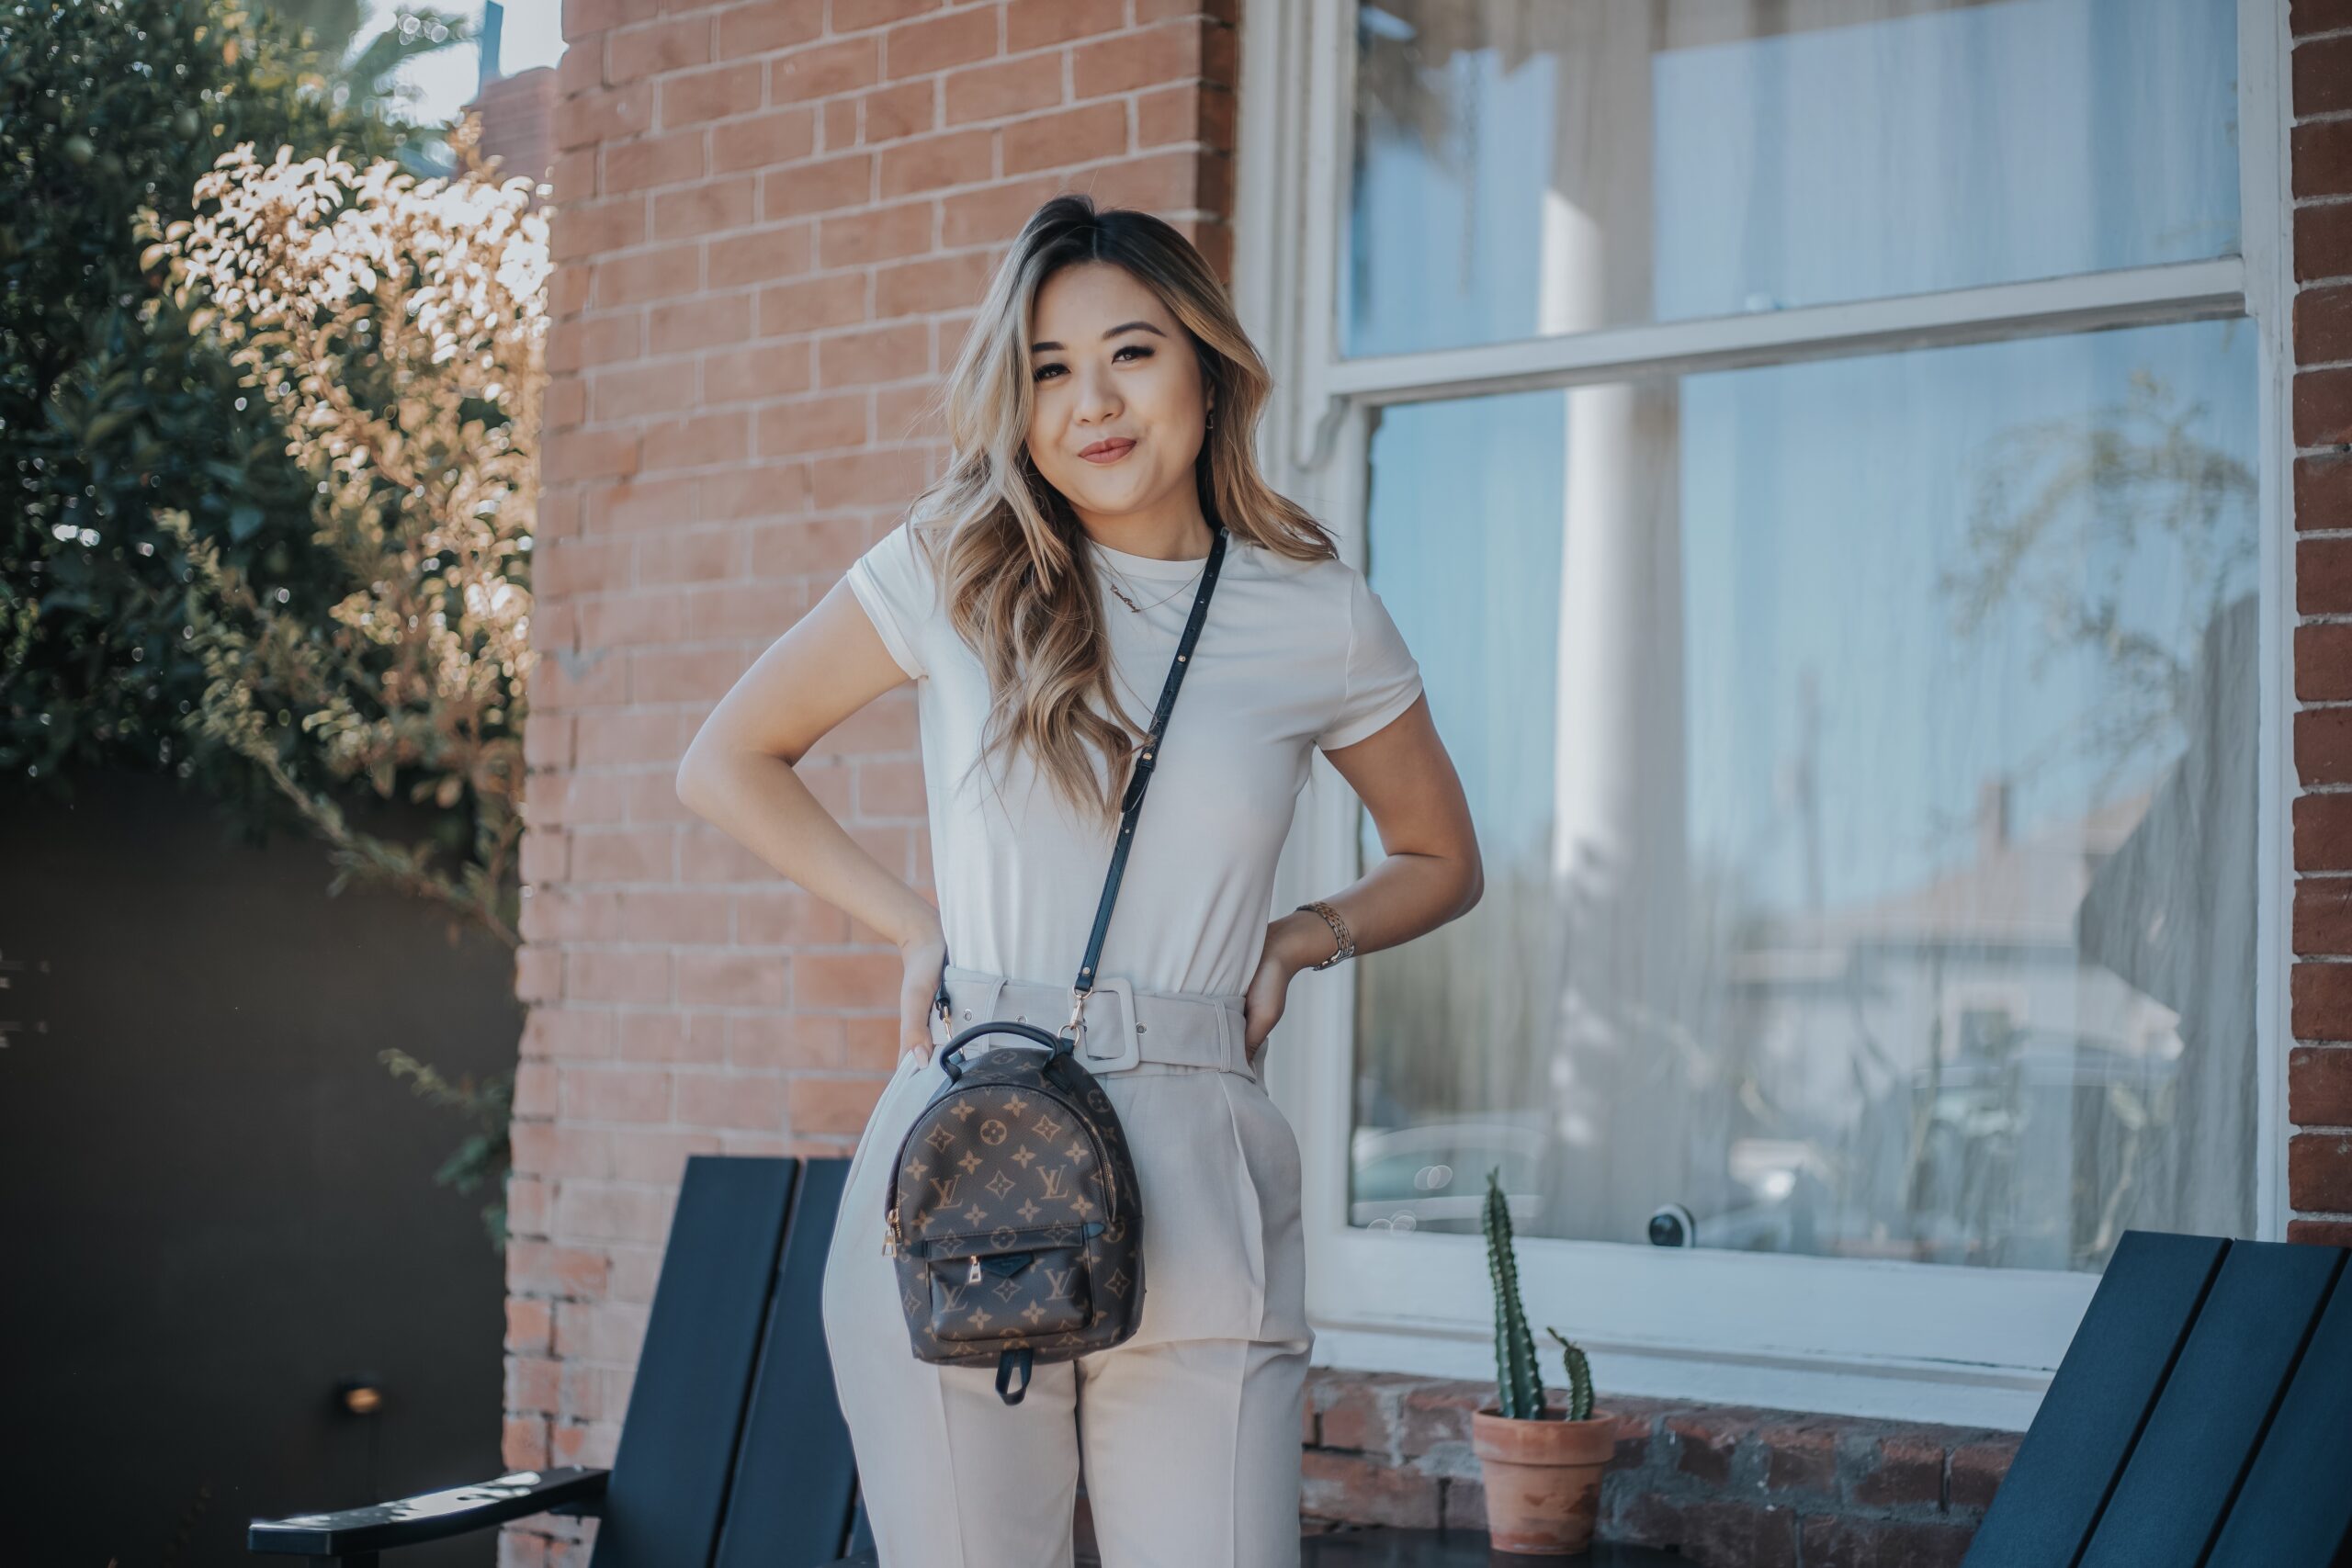 mini backpack review